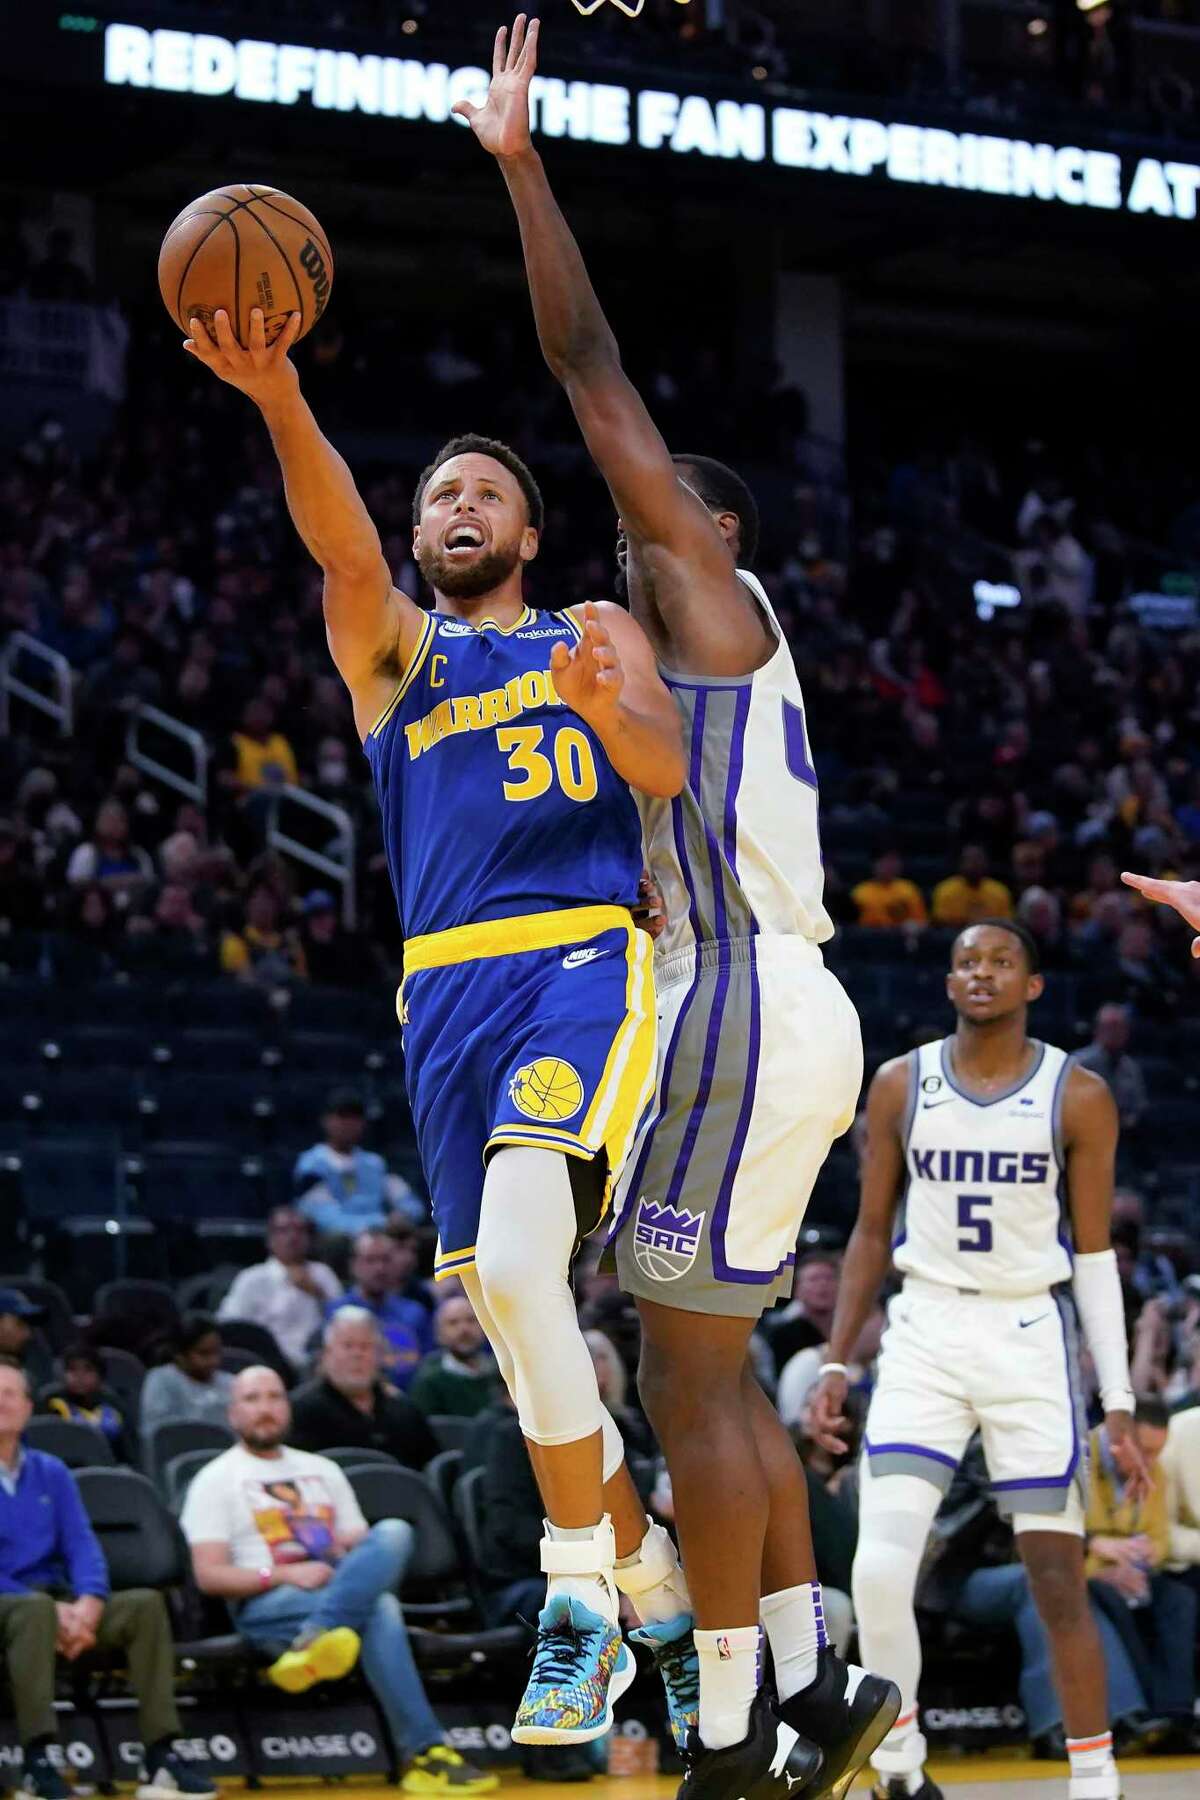 Golden State Warriors guard Stephen Curry (30) shoots against Sacramento Kings forward Harrison Barnes during the second half of an NBA basketball game in San Francisco, Monday, Nov. 7, 2022. (AP Photo/Jeff Chiu)